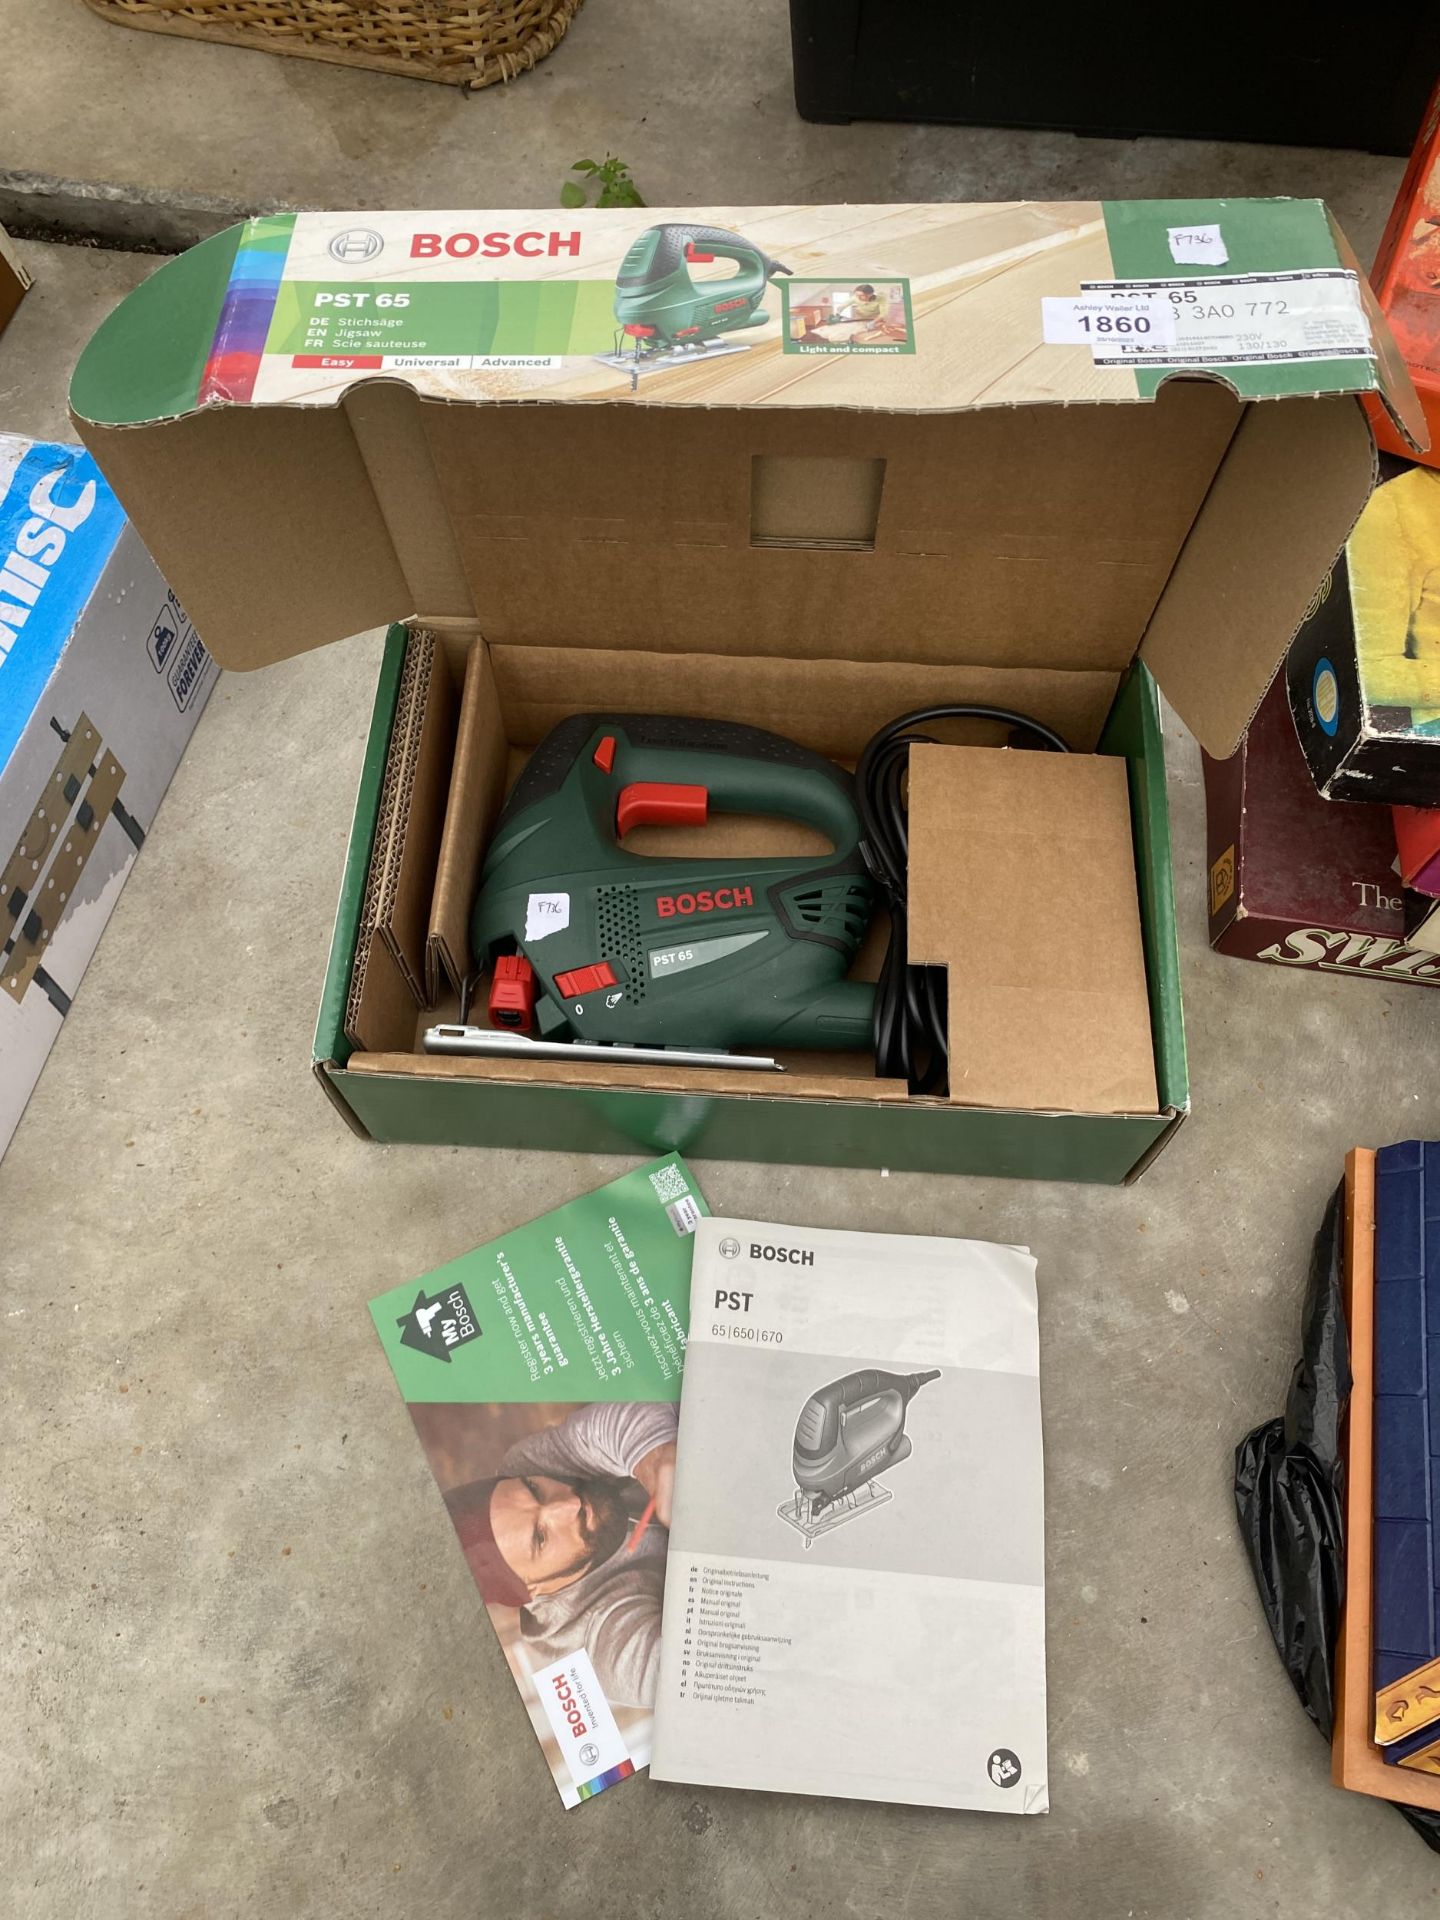 A NEW AND BOXED BOSCH PST65 ELECTRIC JIGSAW